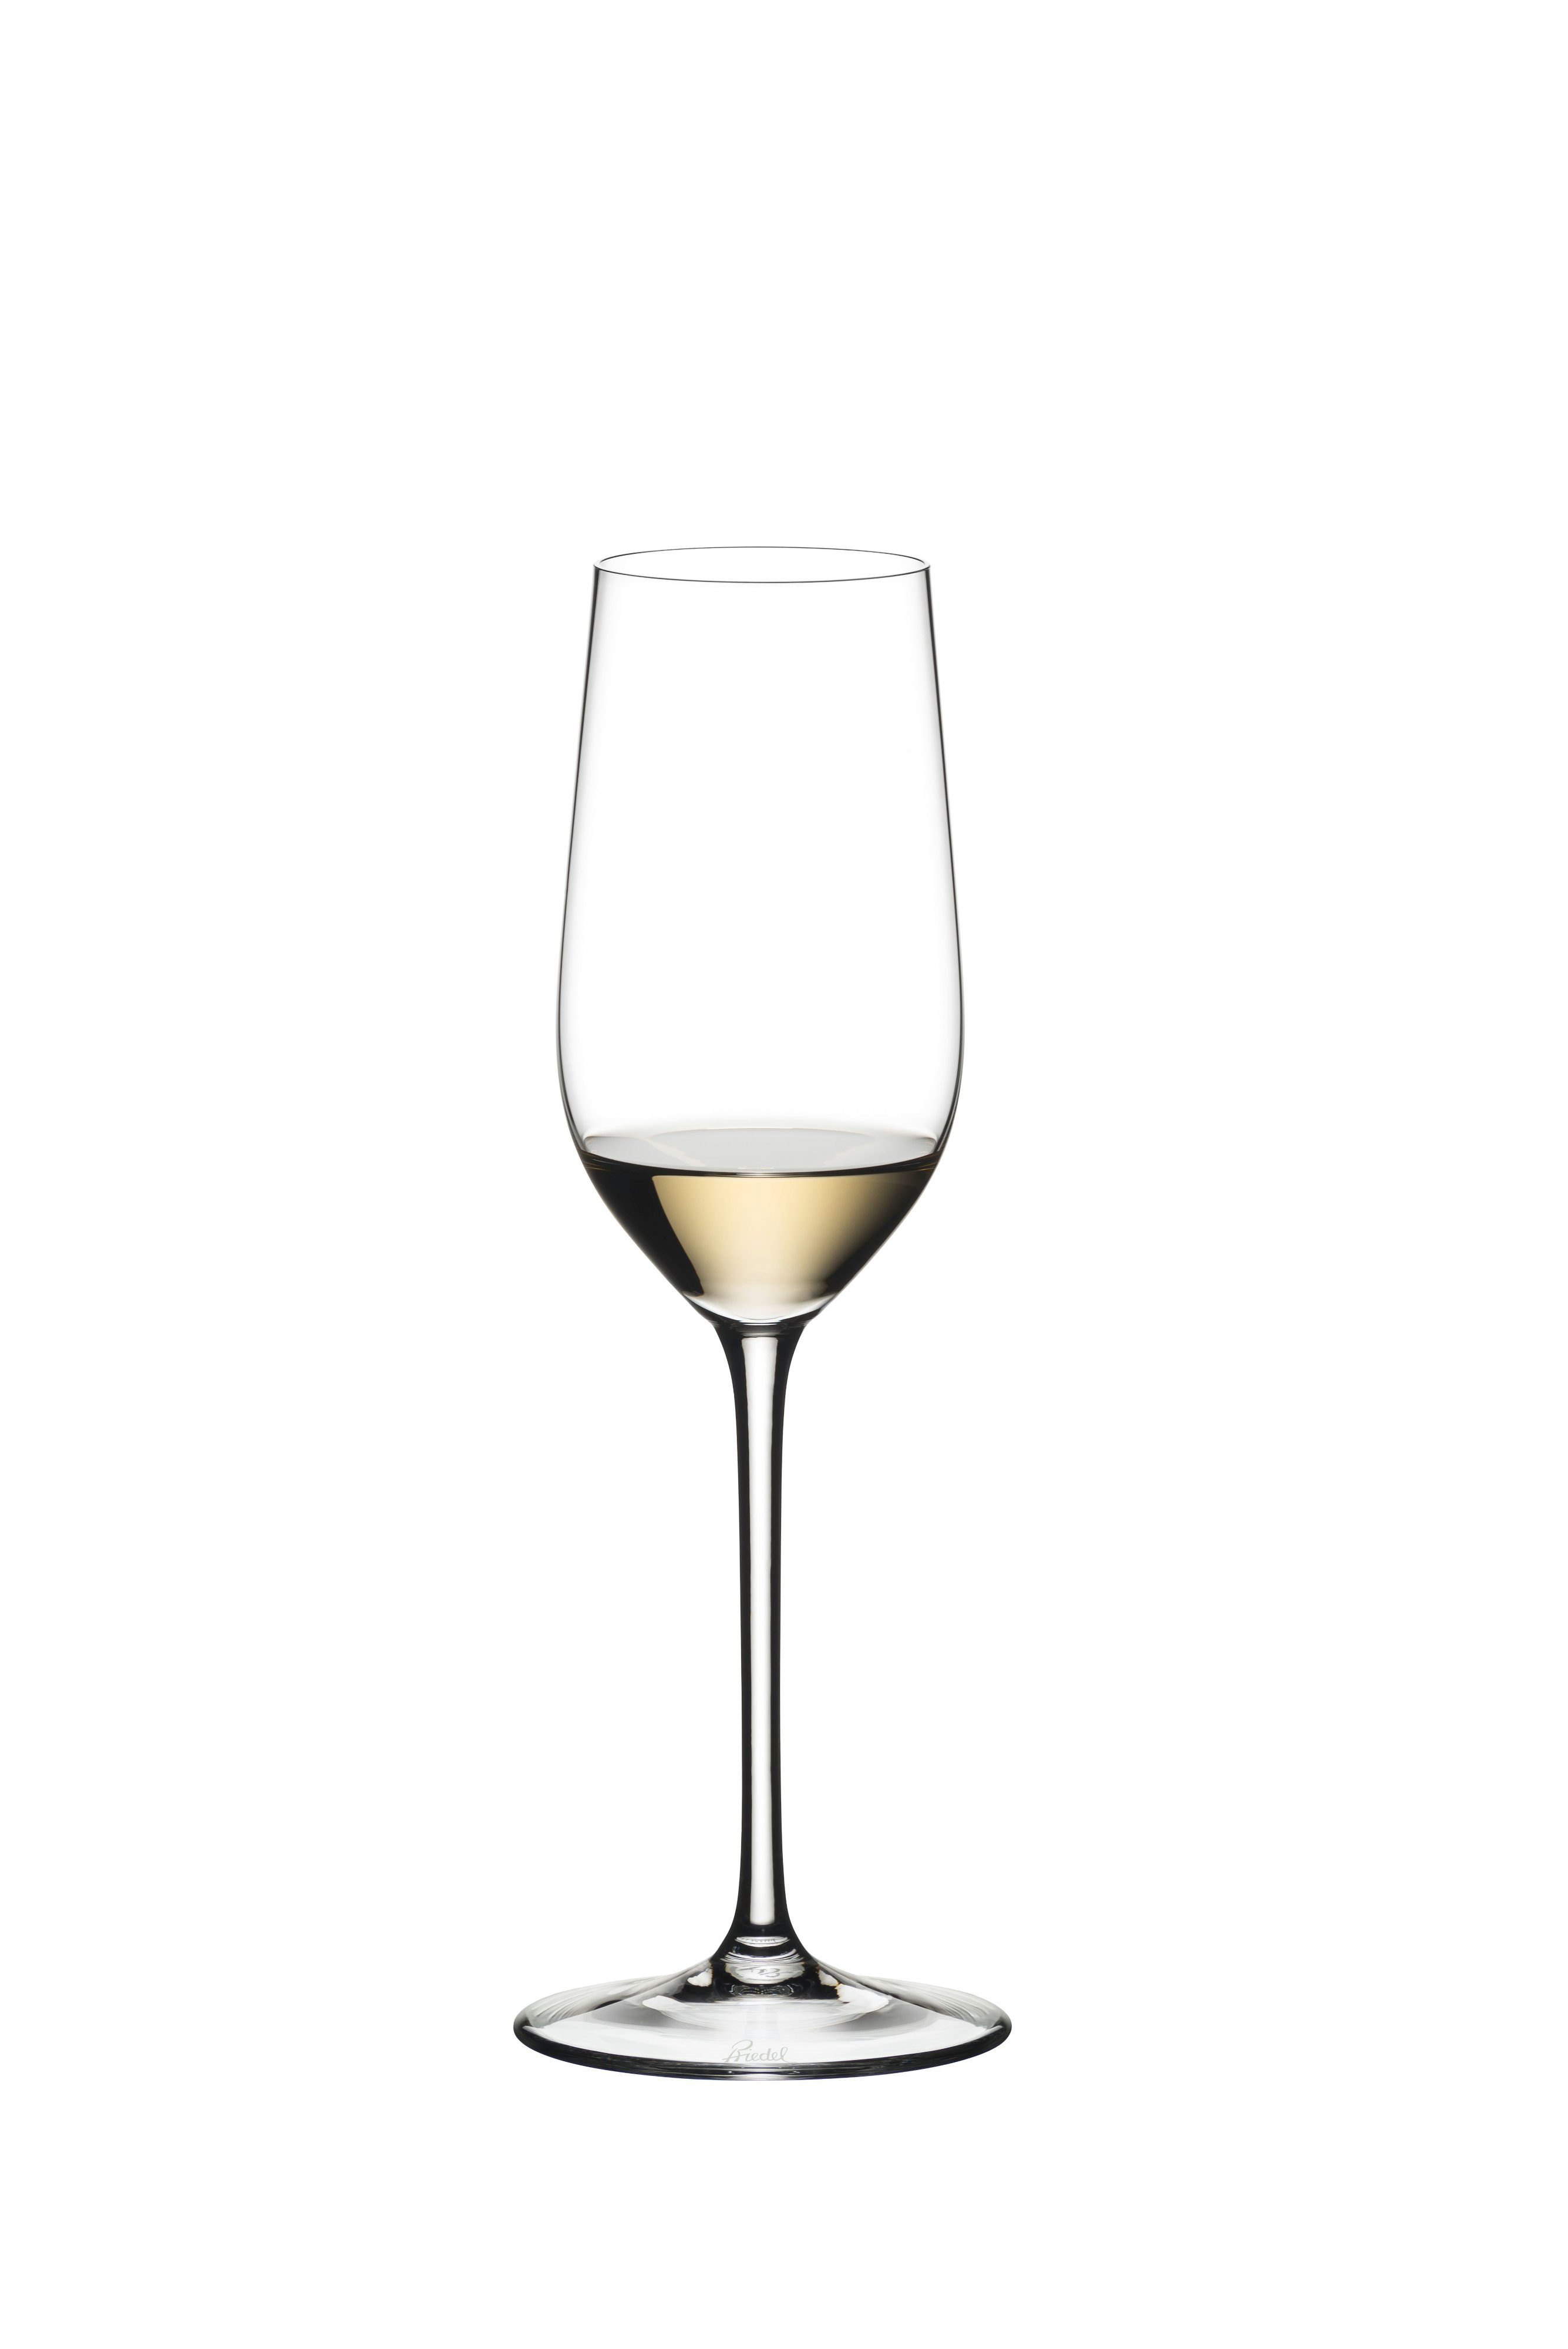 Glas Glas Sherry/Tequila Sommeliers RIEDEL Riedel